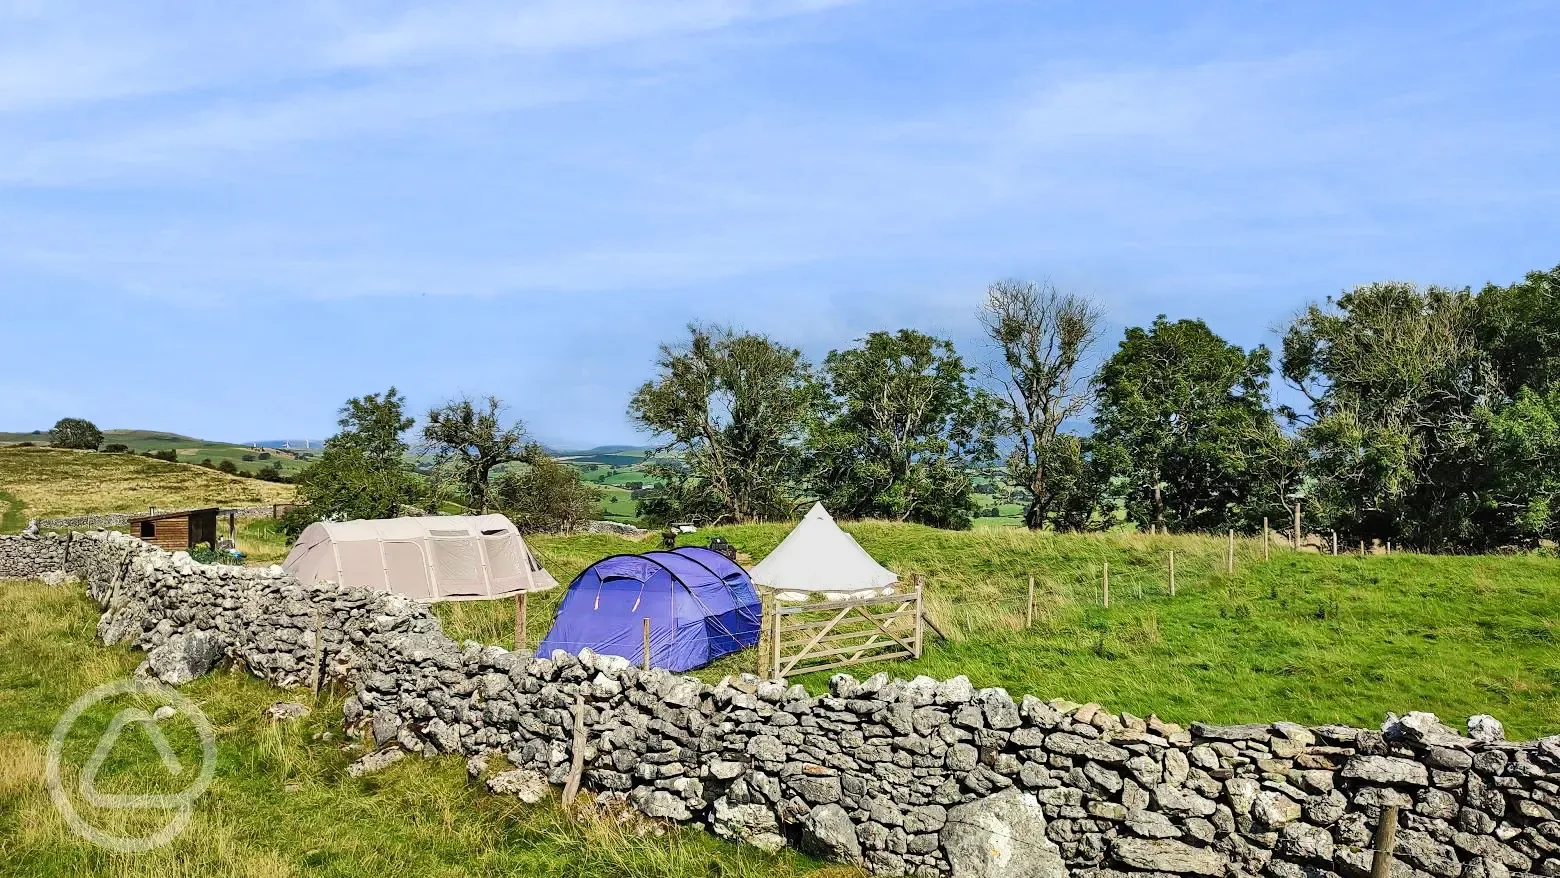 The Top Meadow Bell Tent and Camping